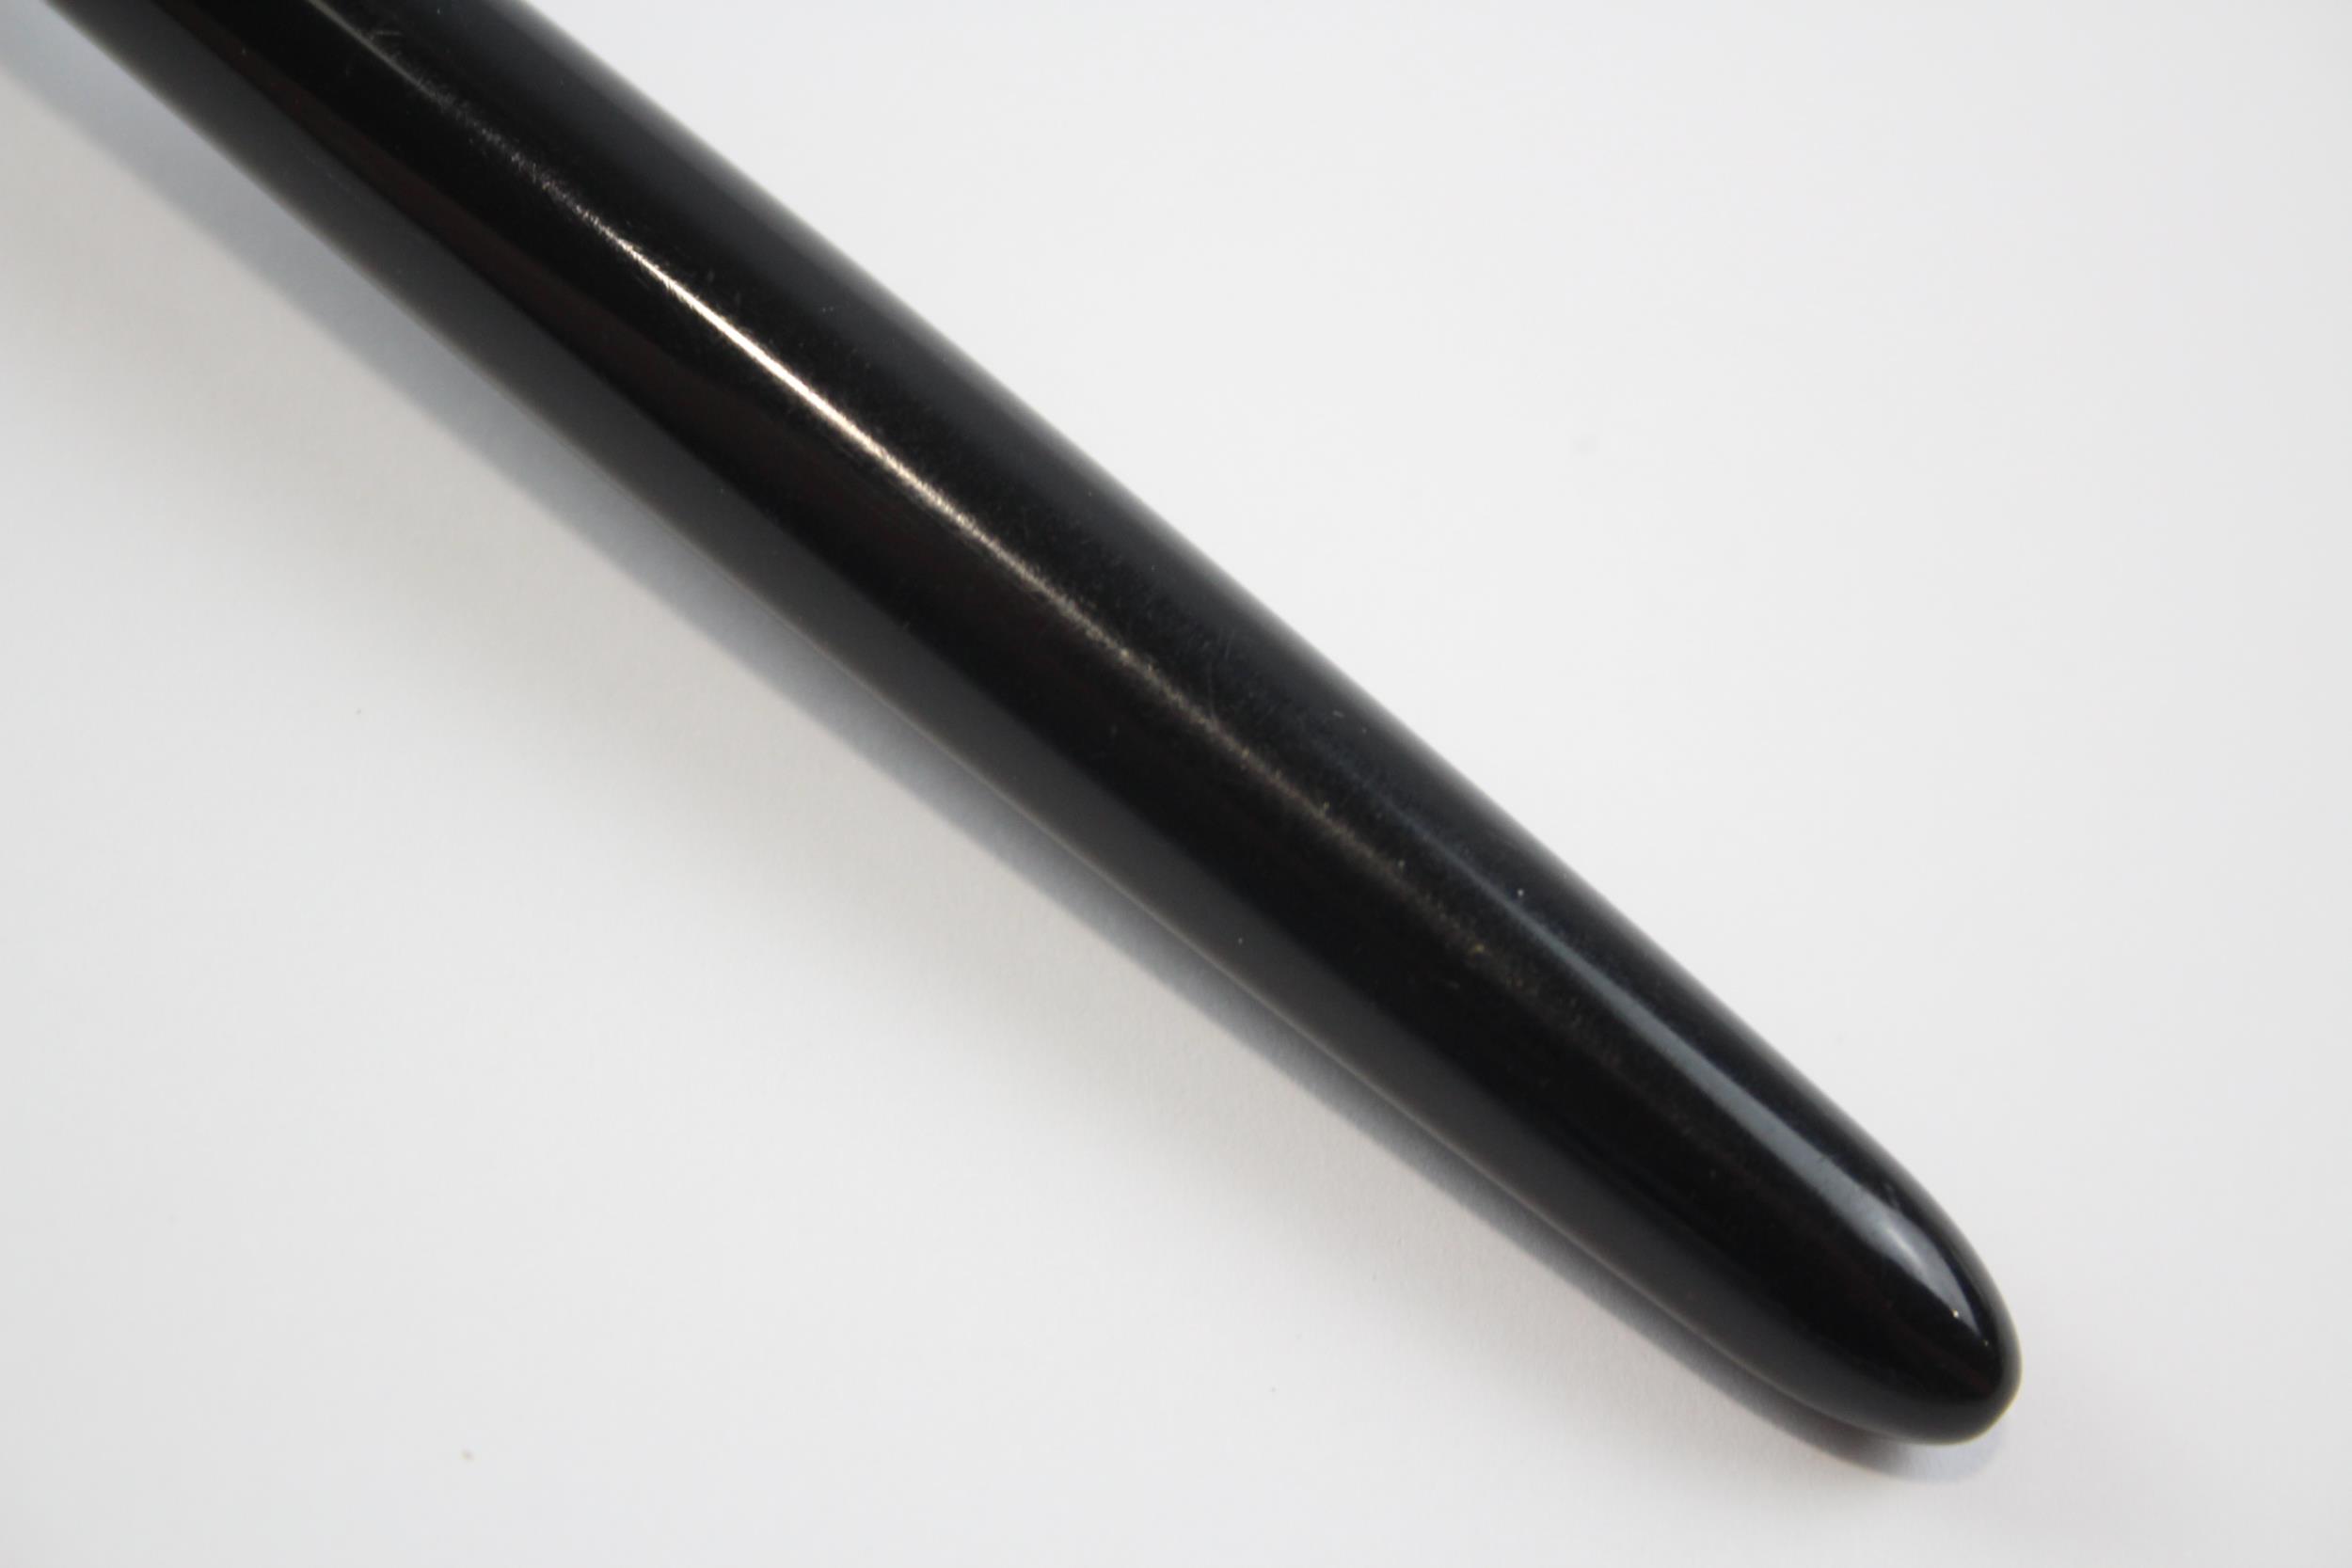 Vintage PARKER 51 Black FOUNTAIN PEN w/ Brushed Steel Cap WRITING // Dip Tested & WRITING In vintage - Image 4 of 4